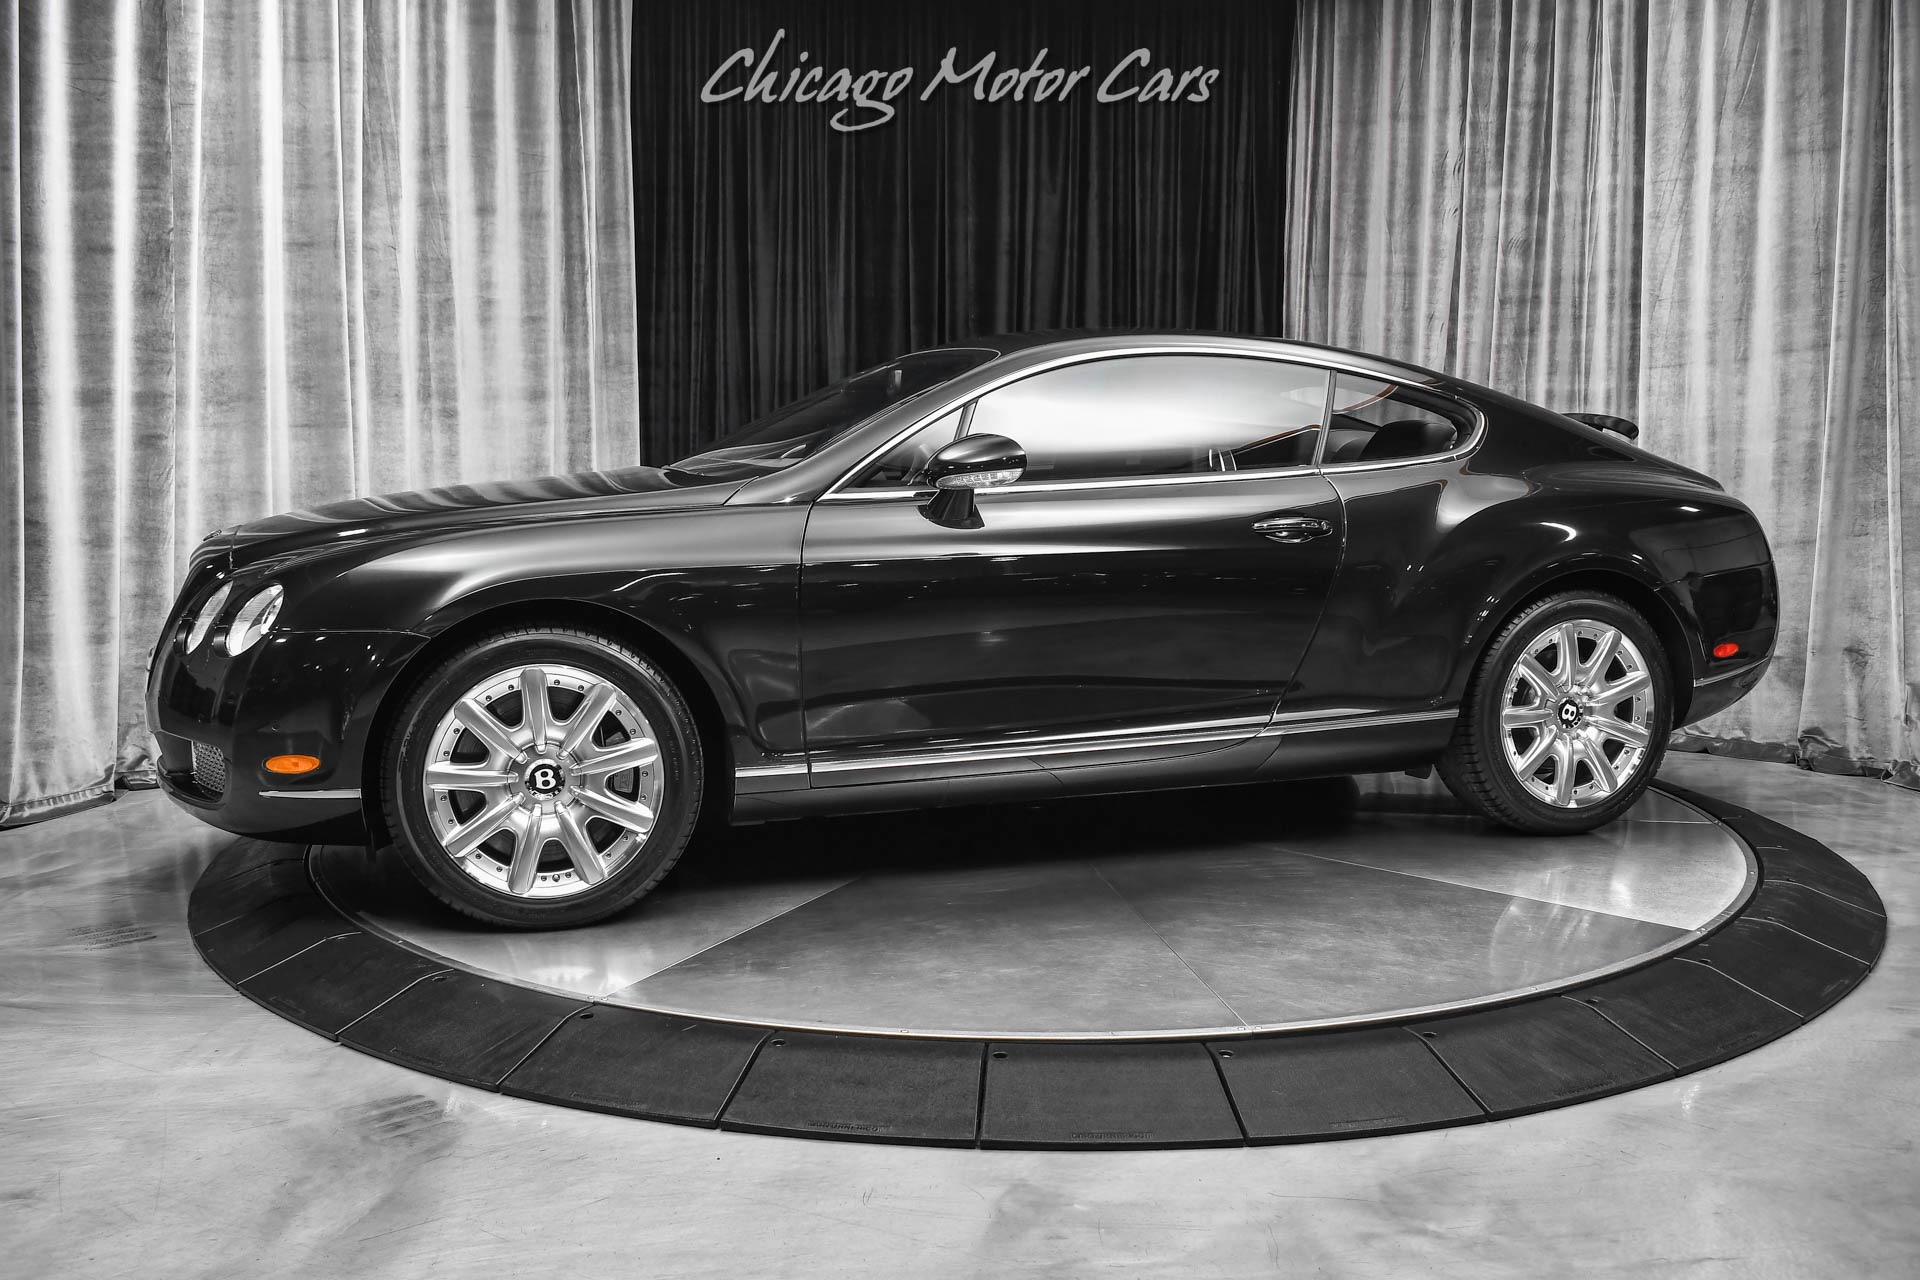 Used-2005-Bentley-Continental-GT-Only-4K-Original-Miles-PPF-Private-Collection-Bentley-Serviced